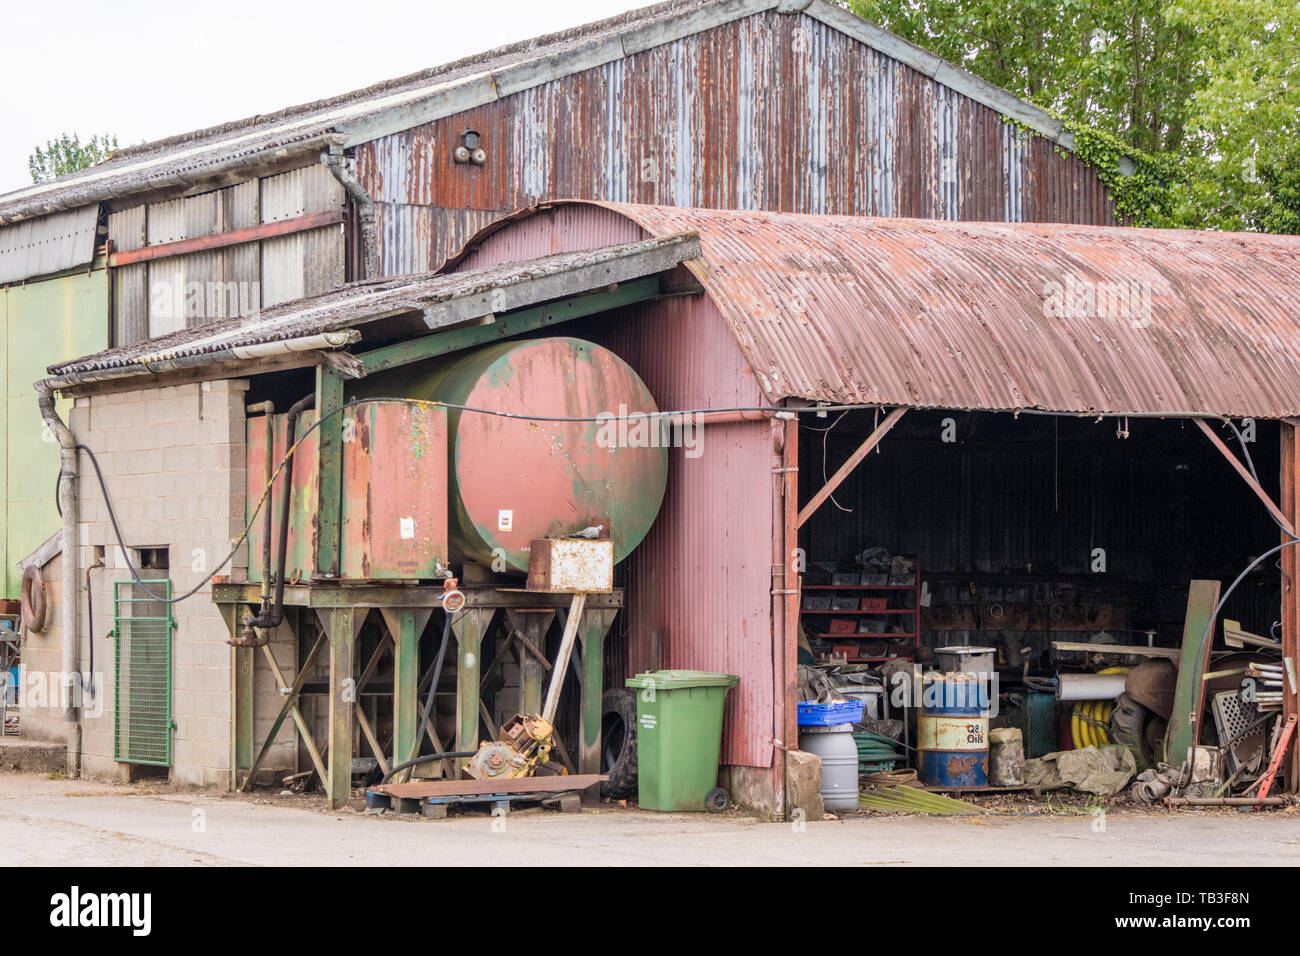 Old industrial farm building, England, UK Stock Photo